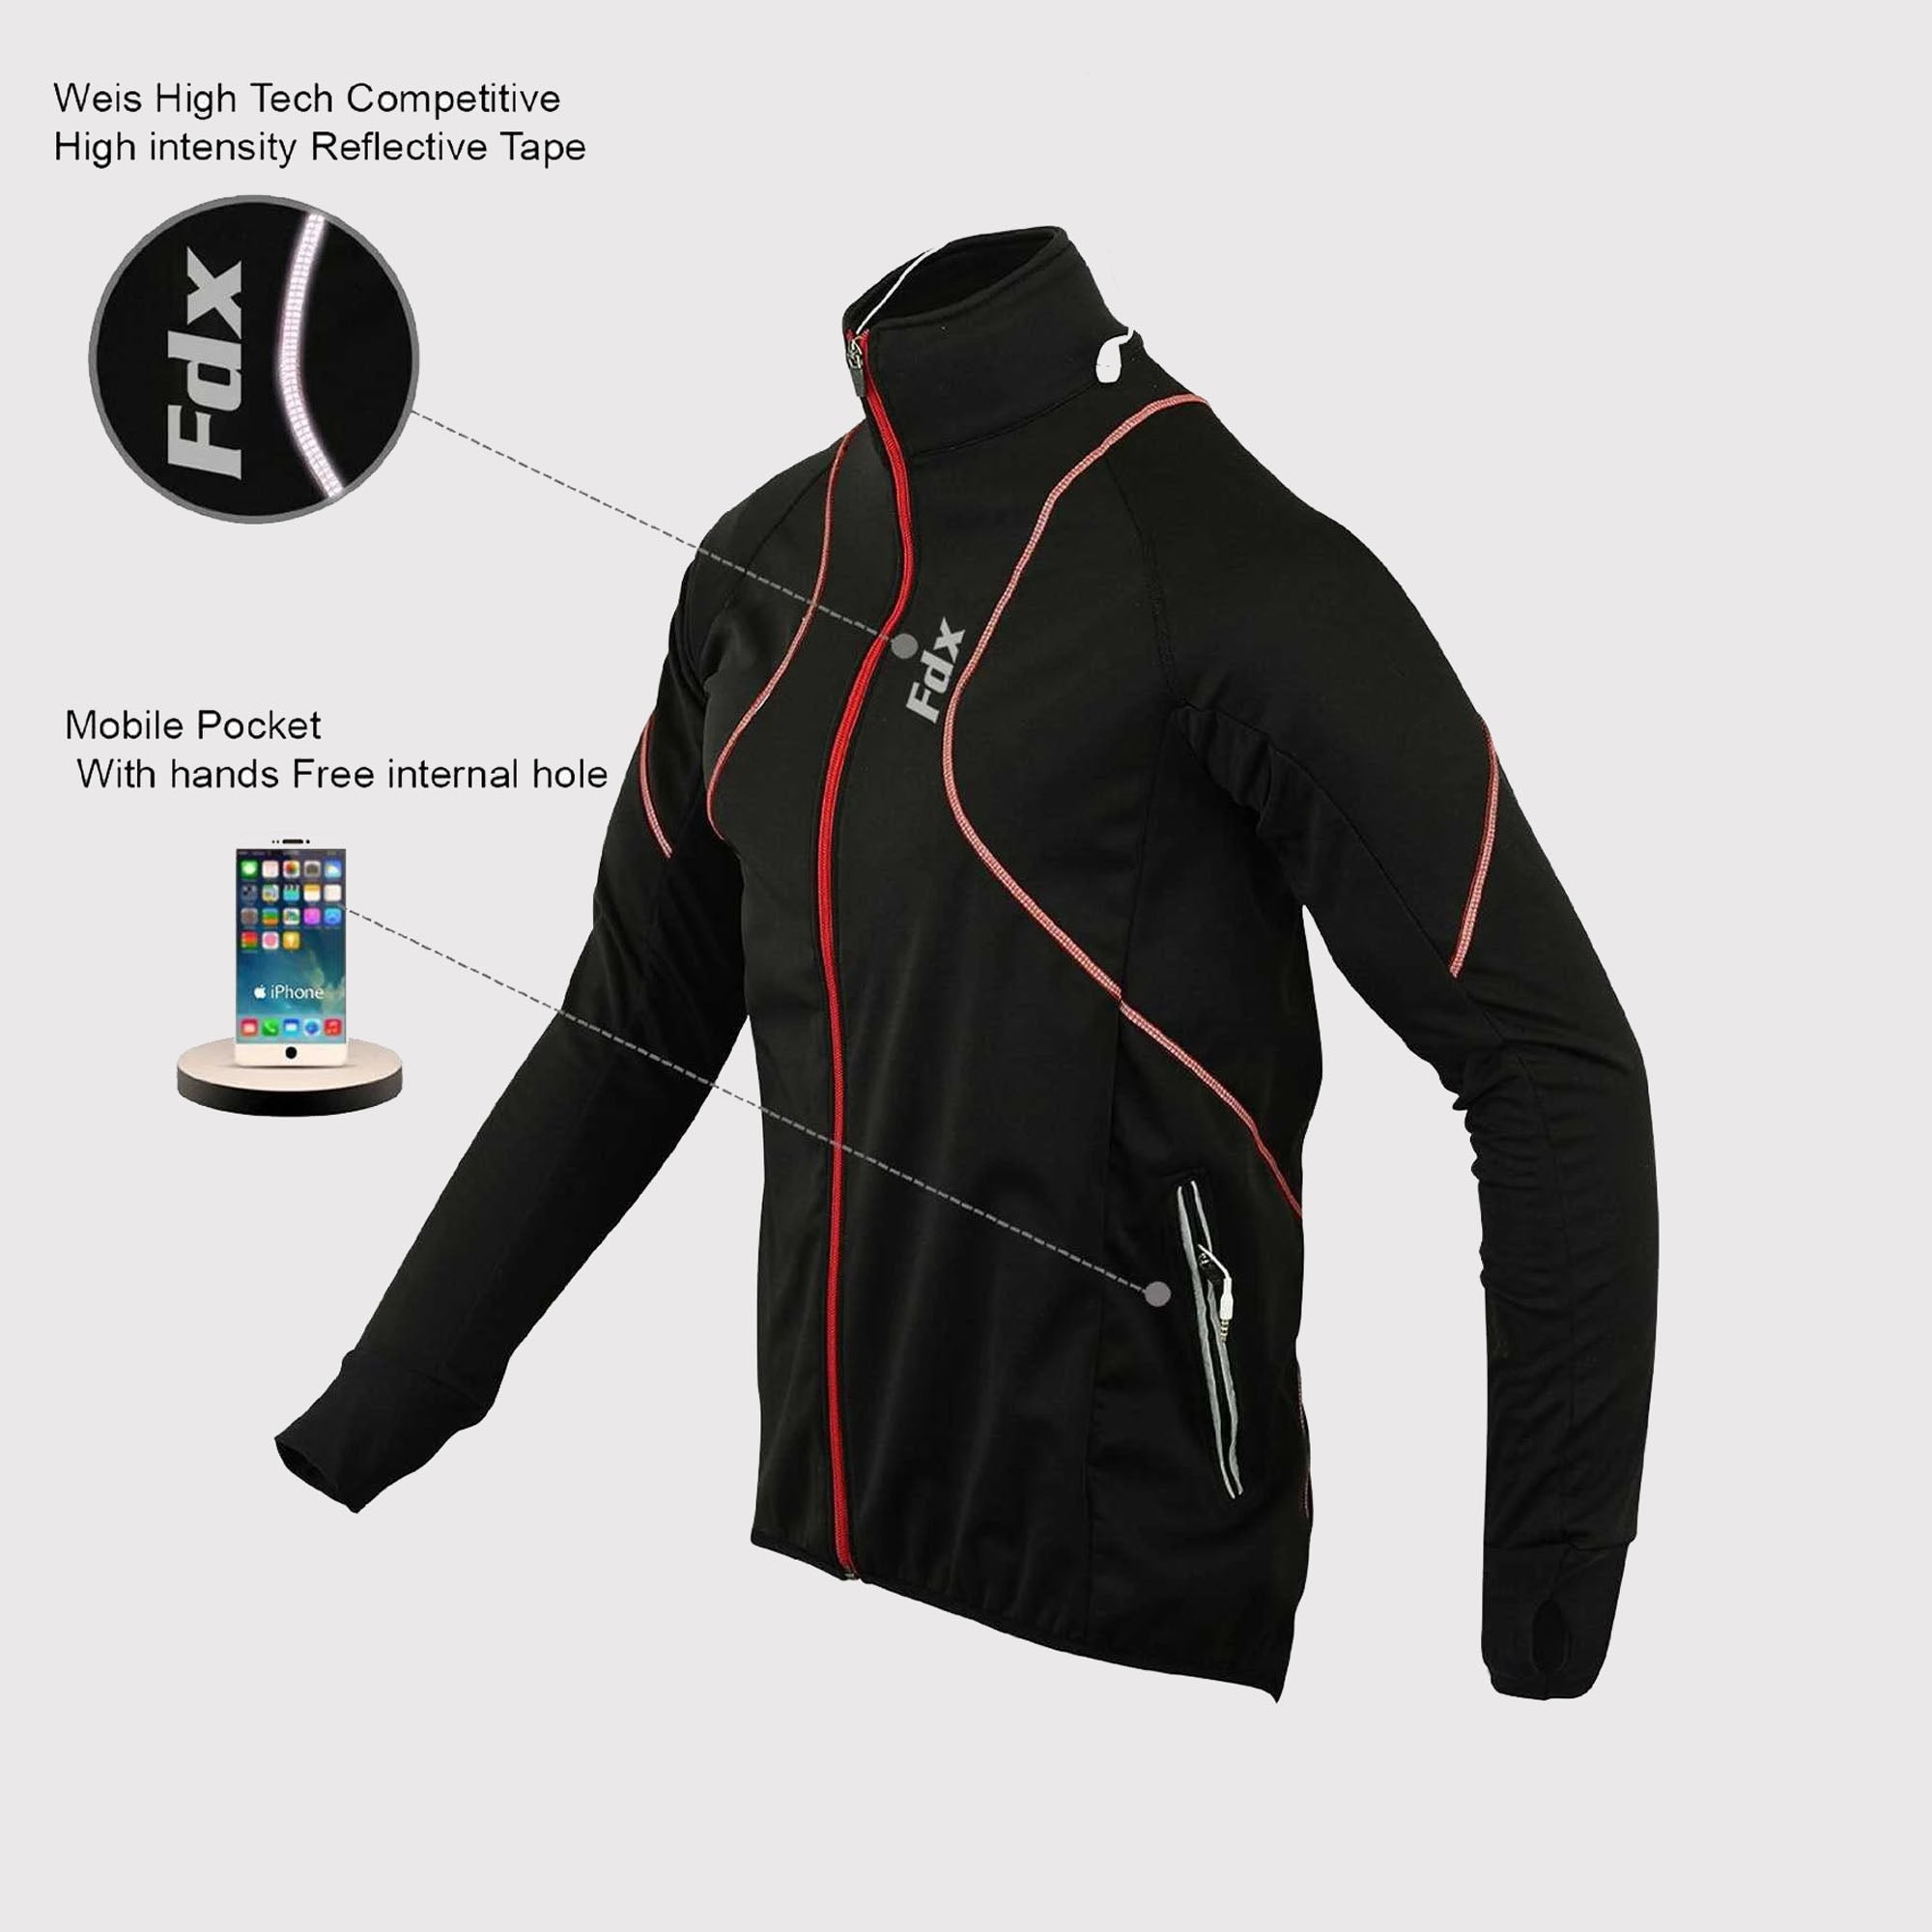 Fdx Mens Black & Red Cycling Jacket for Winter Thermal Casual Softshell Clothing Lightweight, Windproof, Waterproof & Pockets - Gustt